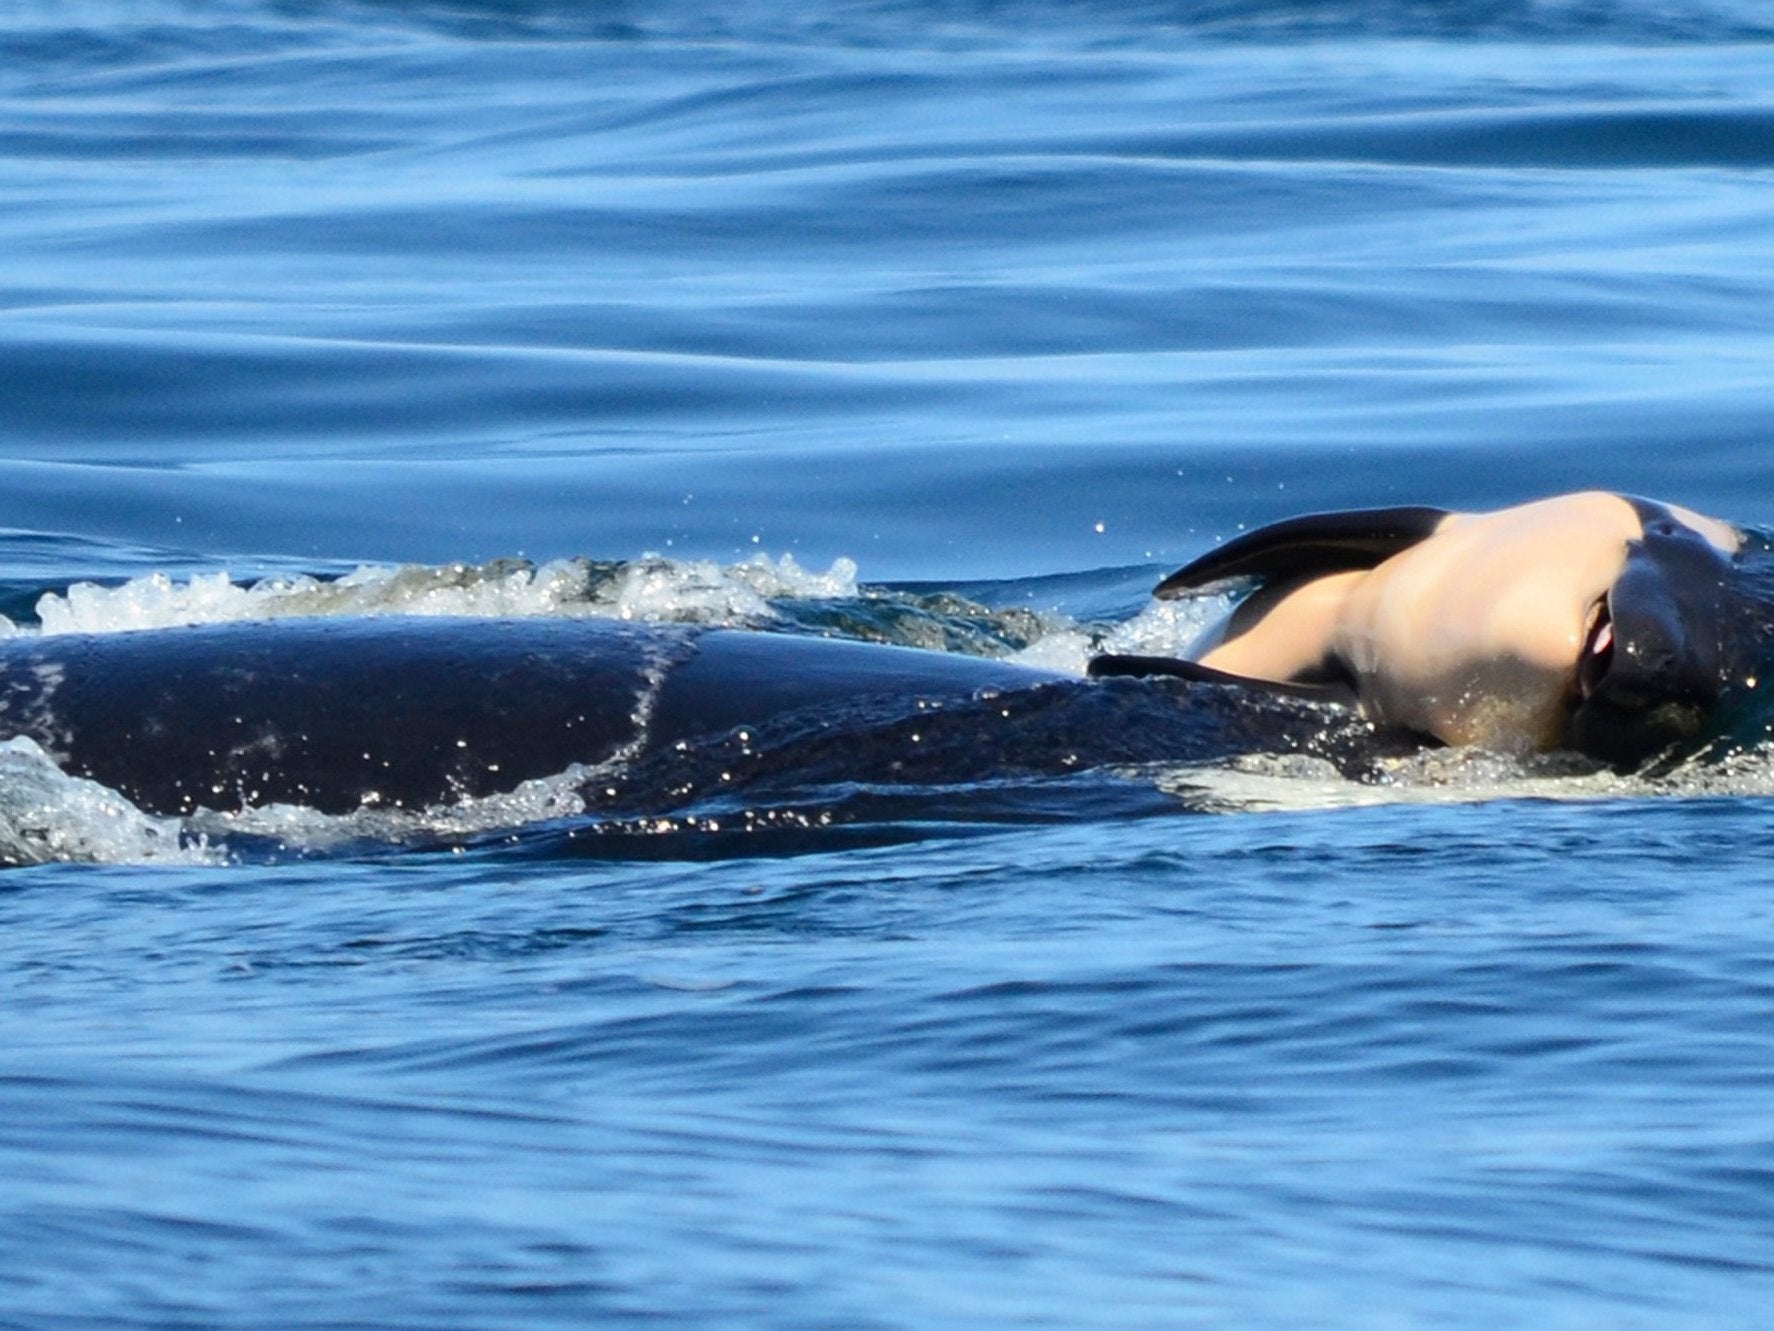 The mother pushes the baby orca after it was born off the coast of Canada near Victoria, British Columbia